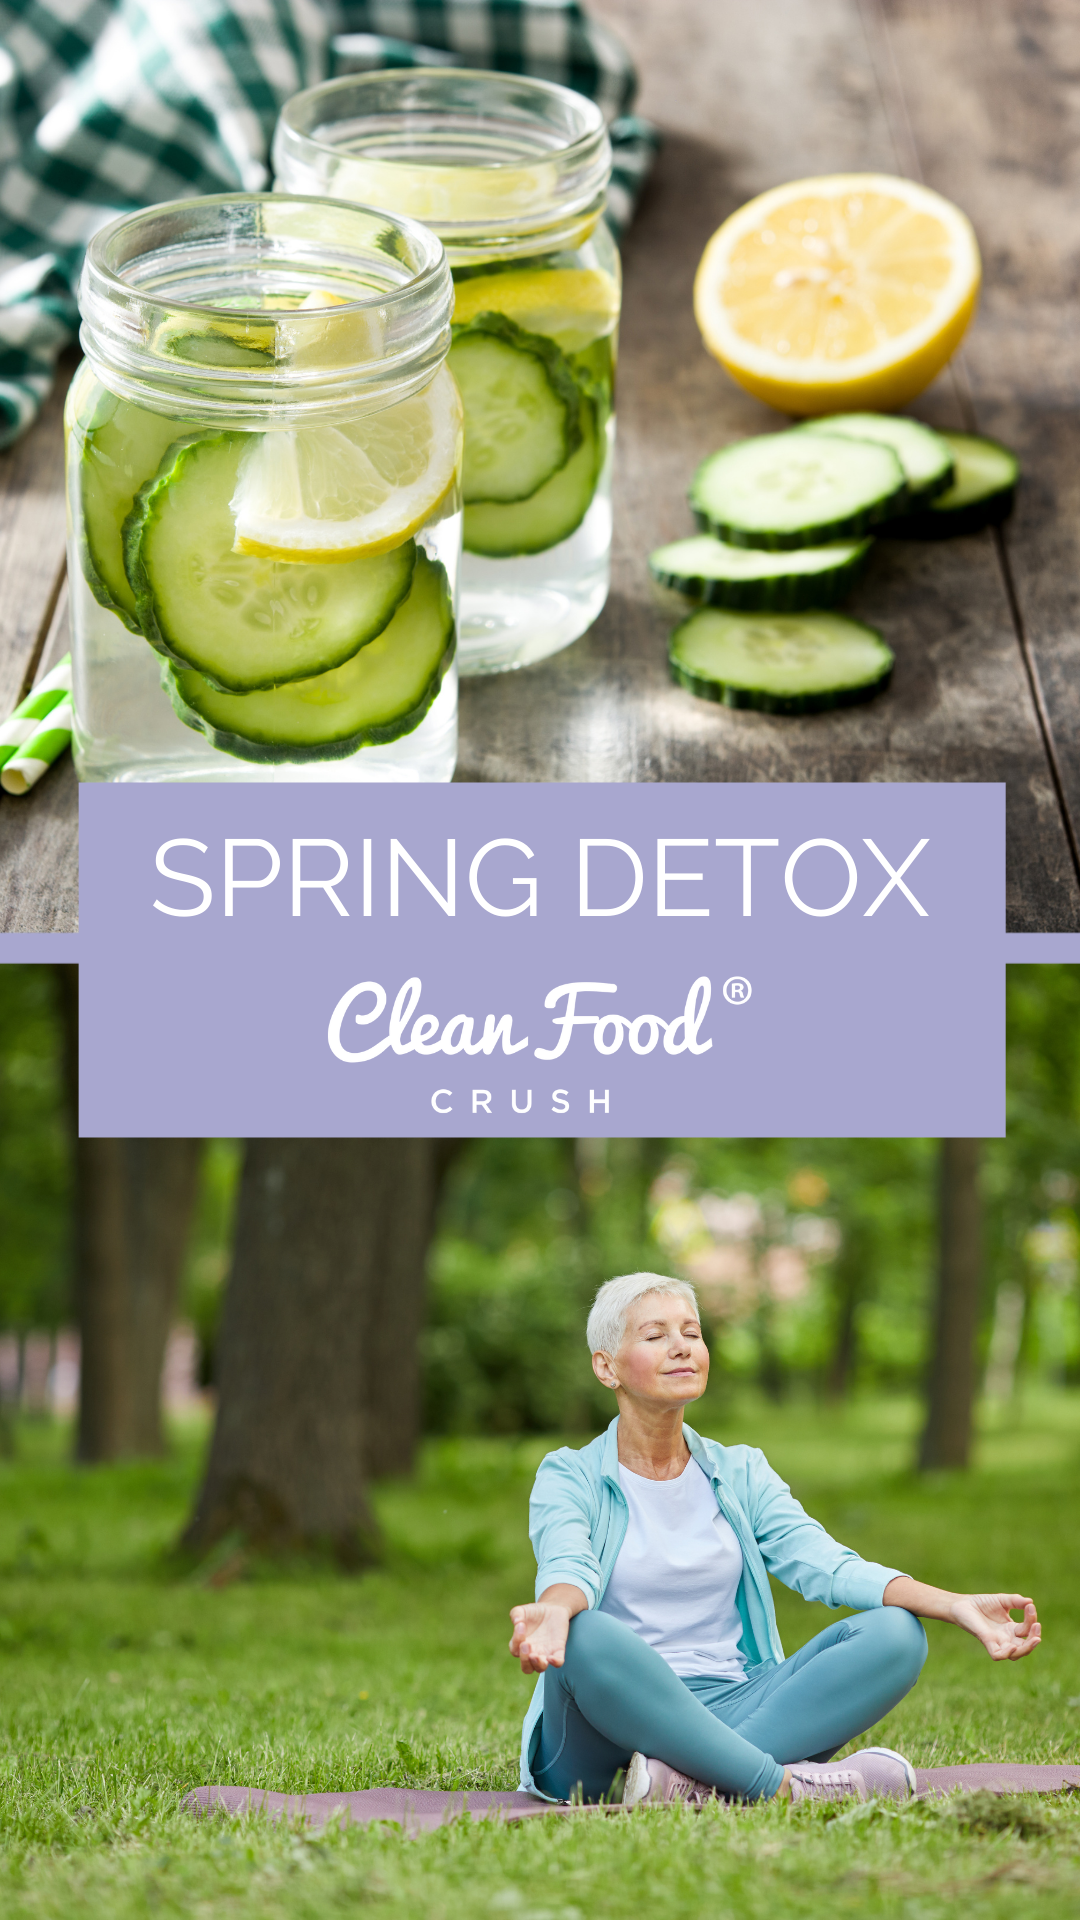 https://cleanfoodcrush.com/wp-content/uploads/2022/04/spring-detox-for-mind-body-and-soul-cleanfoodcrush.png